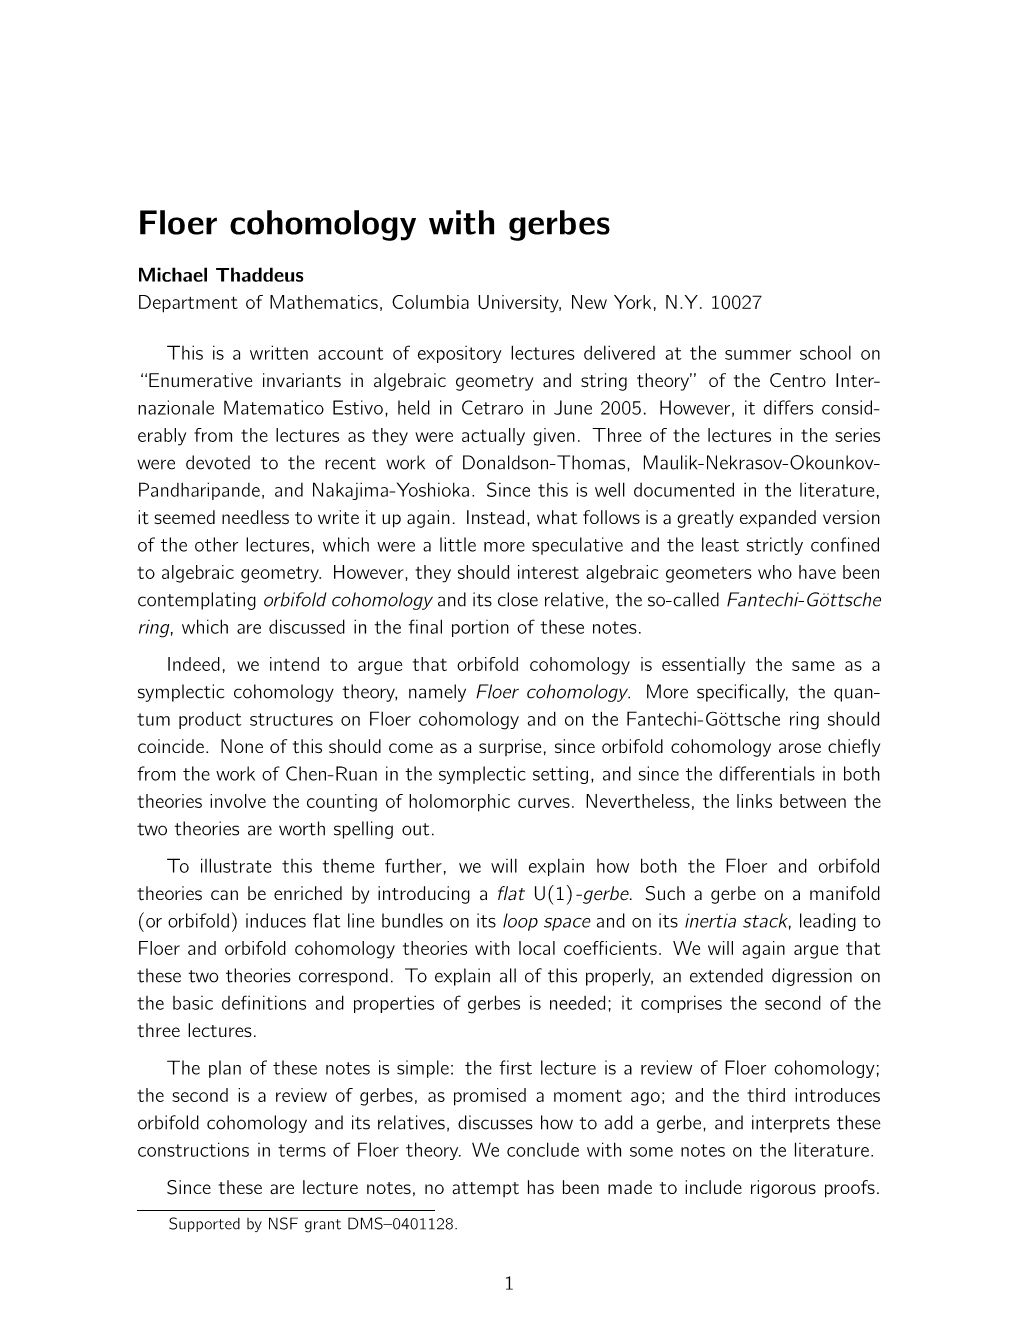 Floer Cohomology with Gerbes